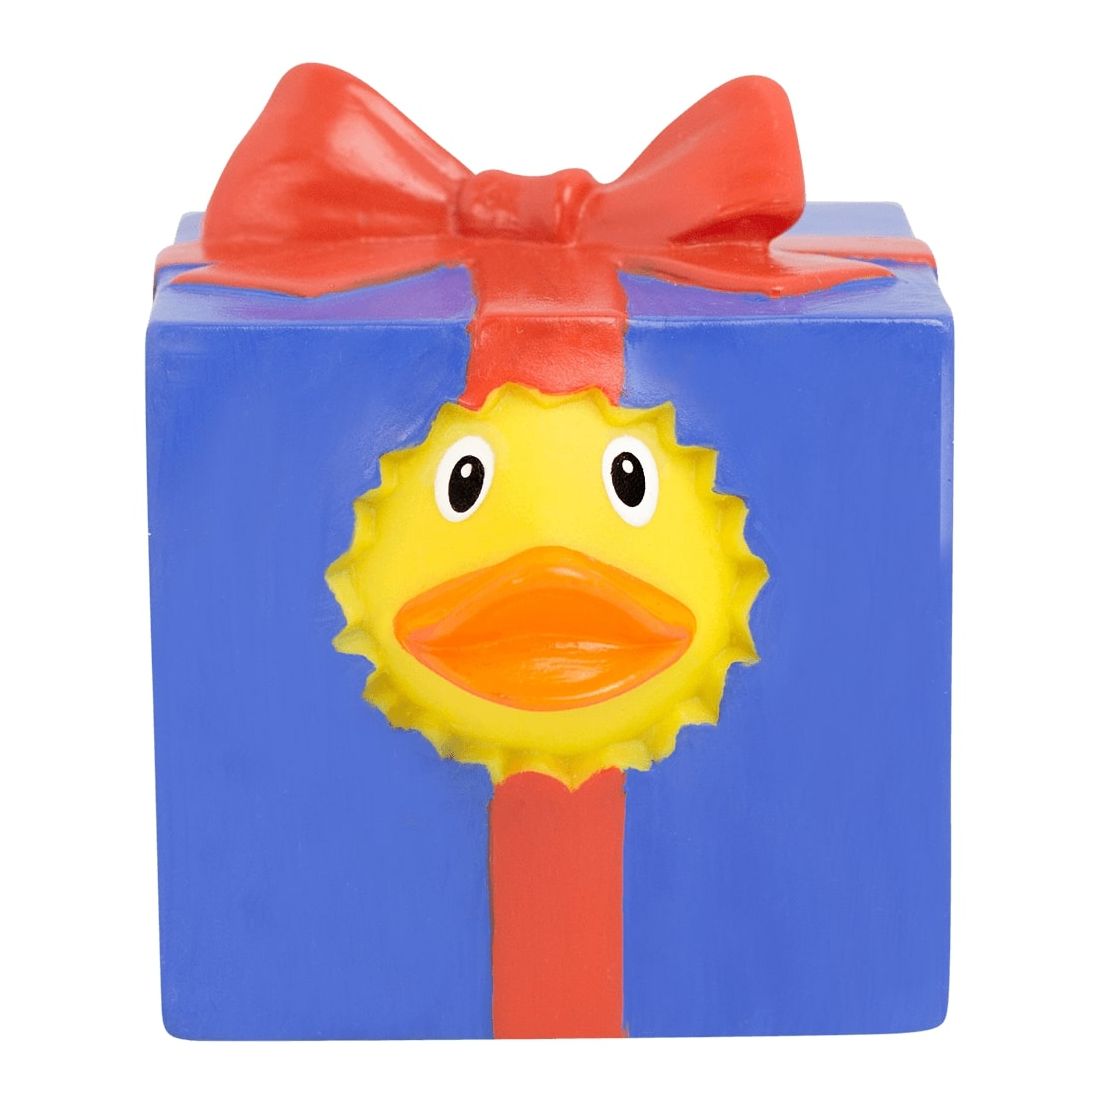 Lilalu Gift Rubber Duck